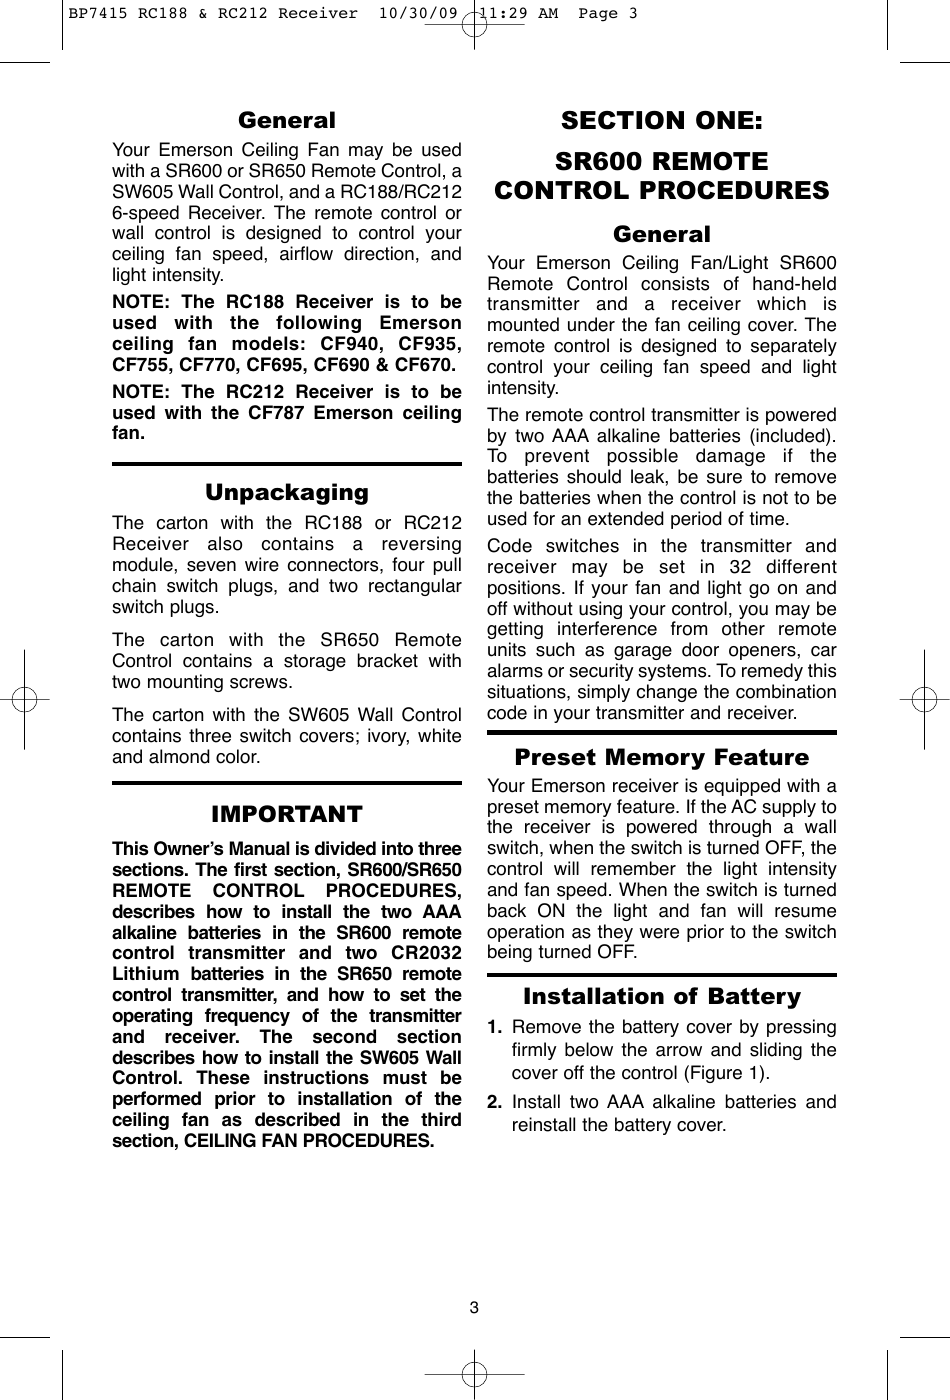 Page 3 of 12 - Emerson Emerson-Rc188-Owners-Manual- BP7415 RC188 & RC212 Receiver  Emerson-rc188-owners-manual